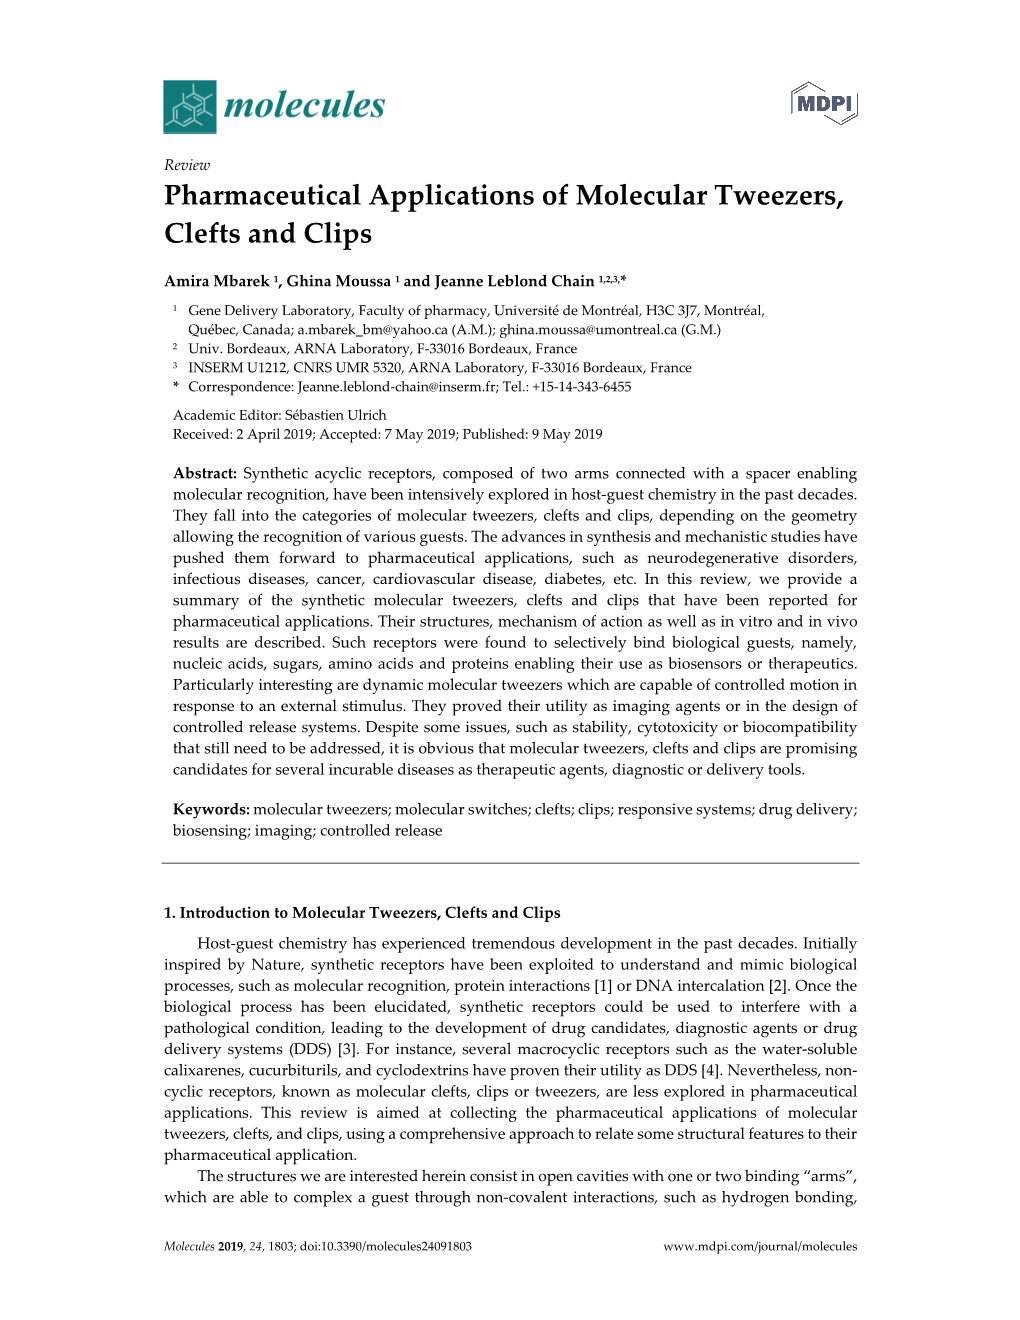 Pharmaceutical Applications of Molecular Tweezers, Clefts and Clips